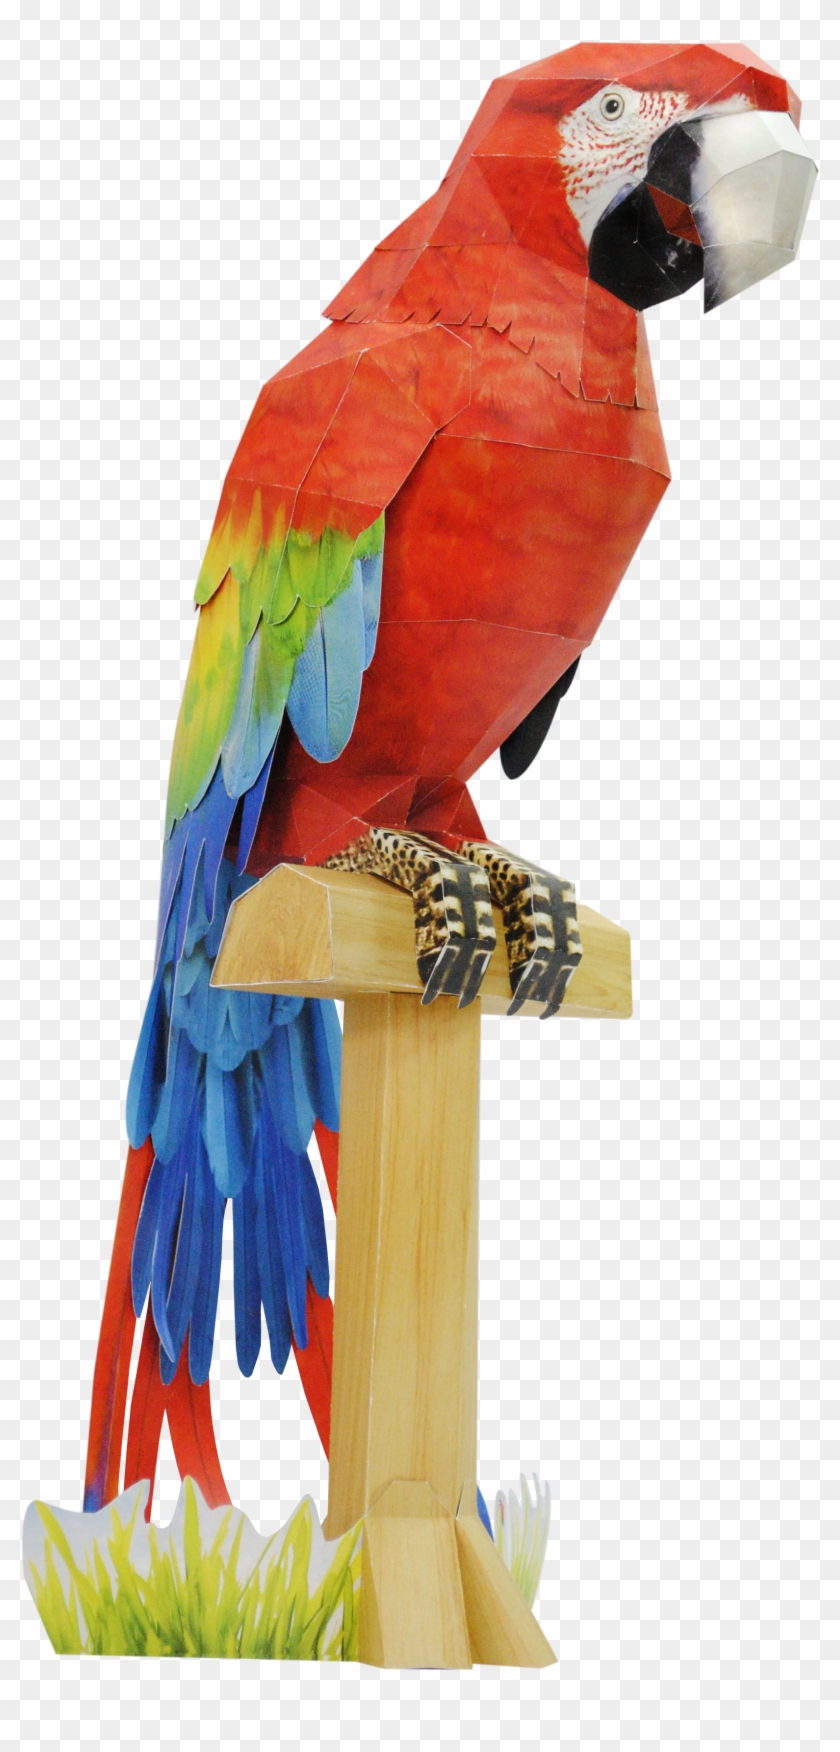 The Scarlet Macaw In Paper By Happy Www Happypapertoy - The Scarlet Macaw In Paper By Happy Www Happypapertoy #468896